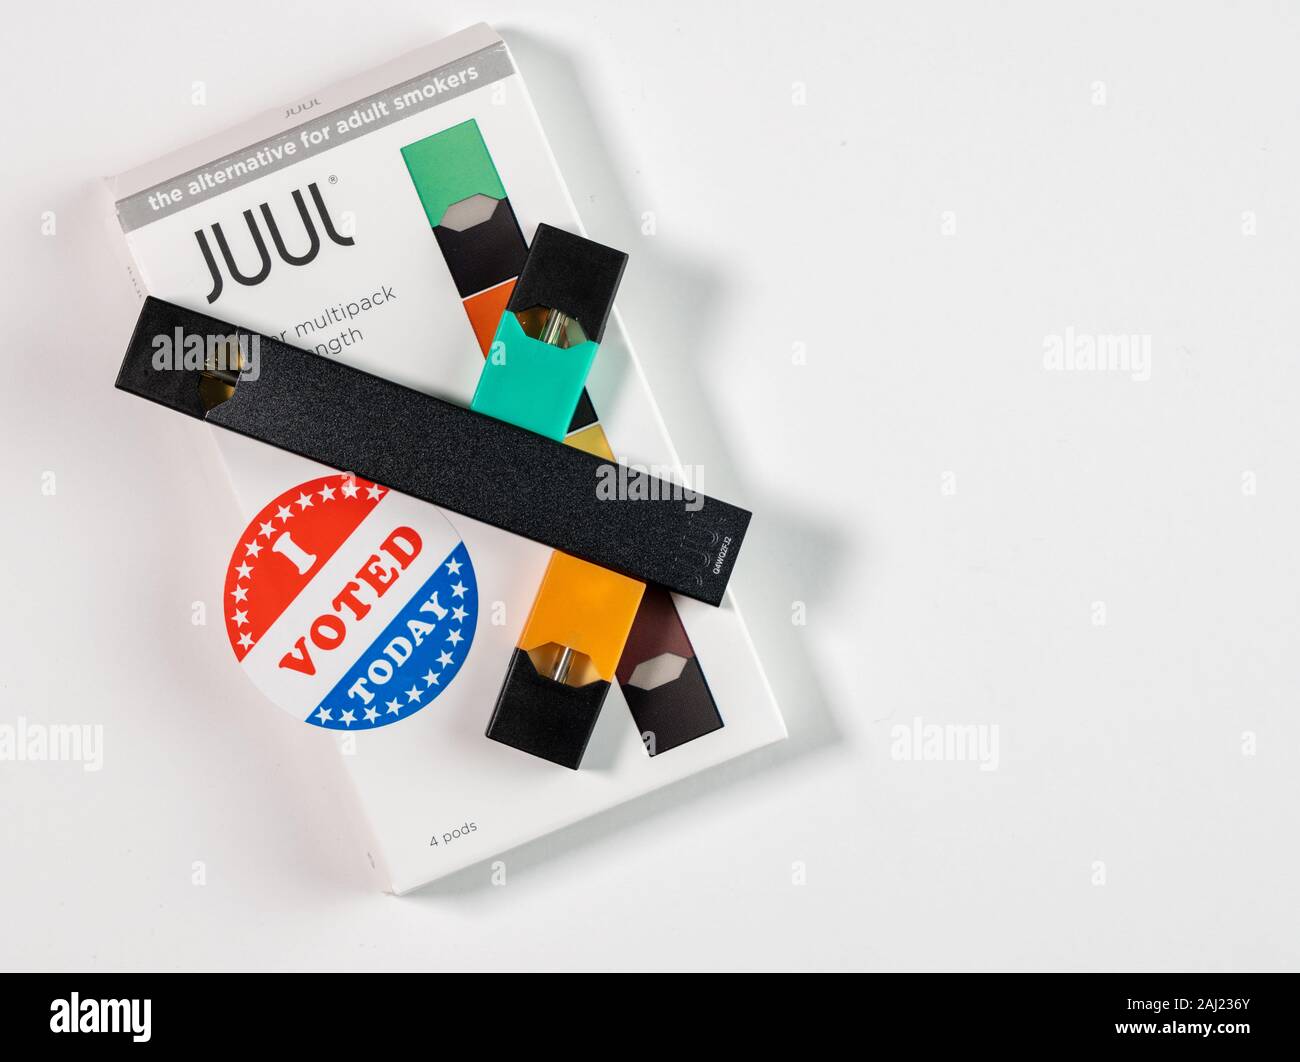 Morgantown, WV - 2 January 2020: Juul flavored nicotine vaping system with I Voted sticker to illustrate political issues with a ban Stock Photo